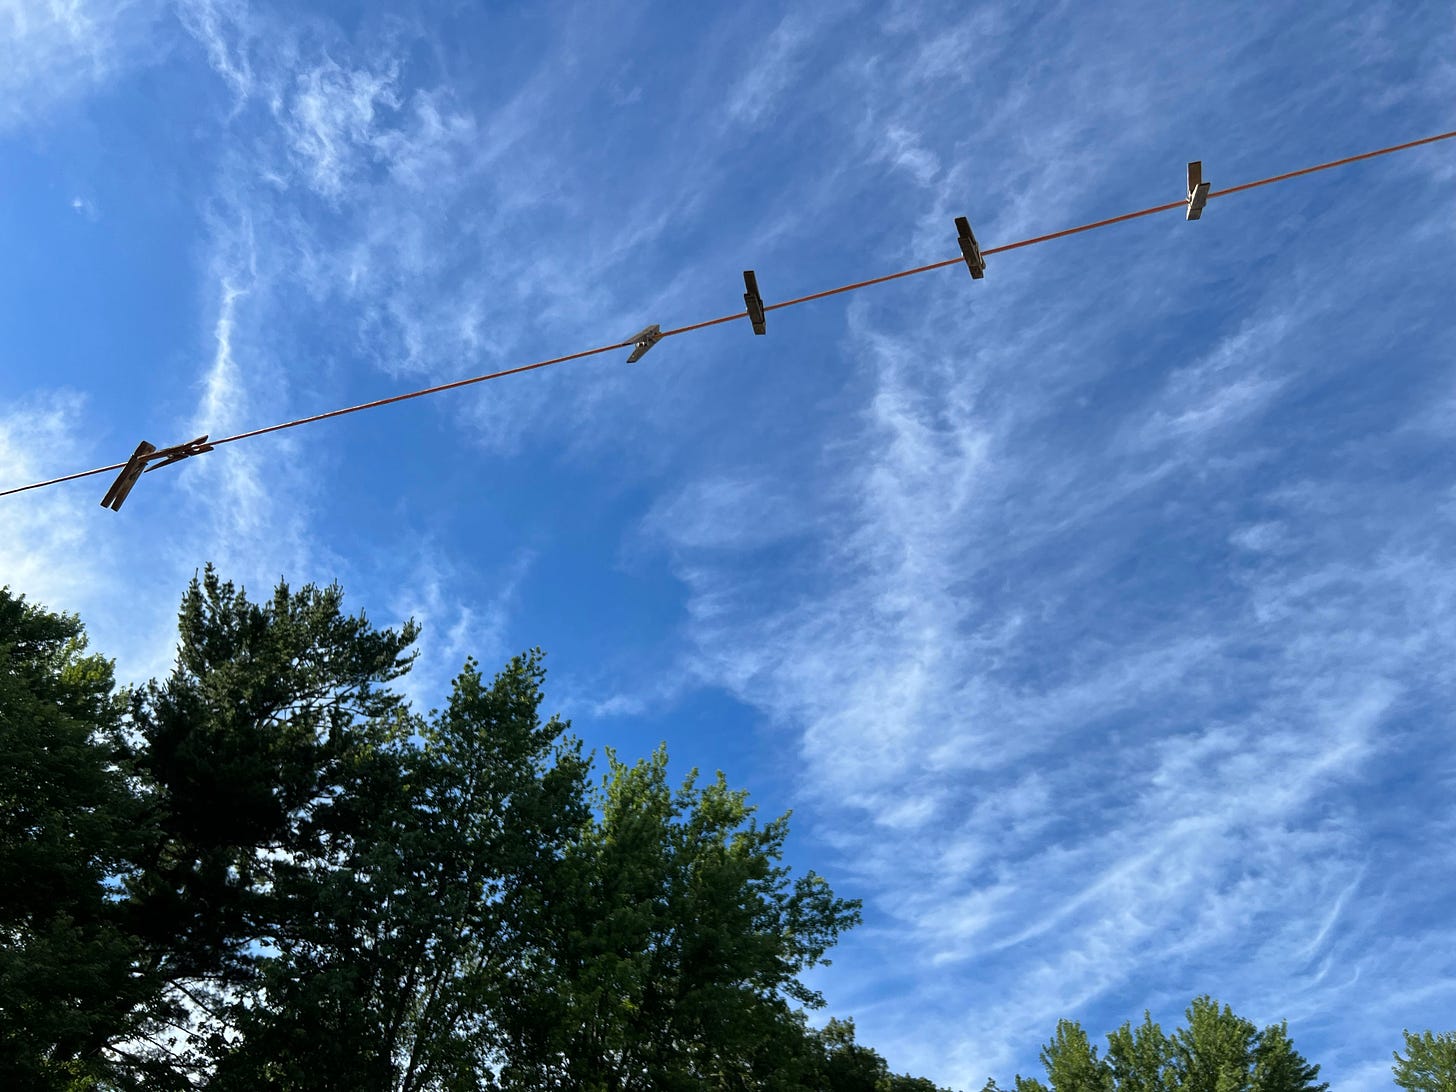 A clothesline and clothespins against a mostly clear sky, a hew high clouds, and some evergreen trees